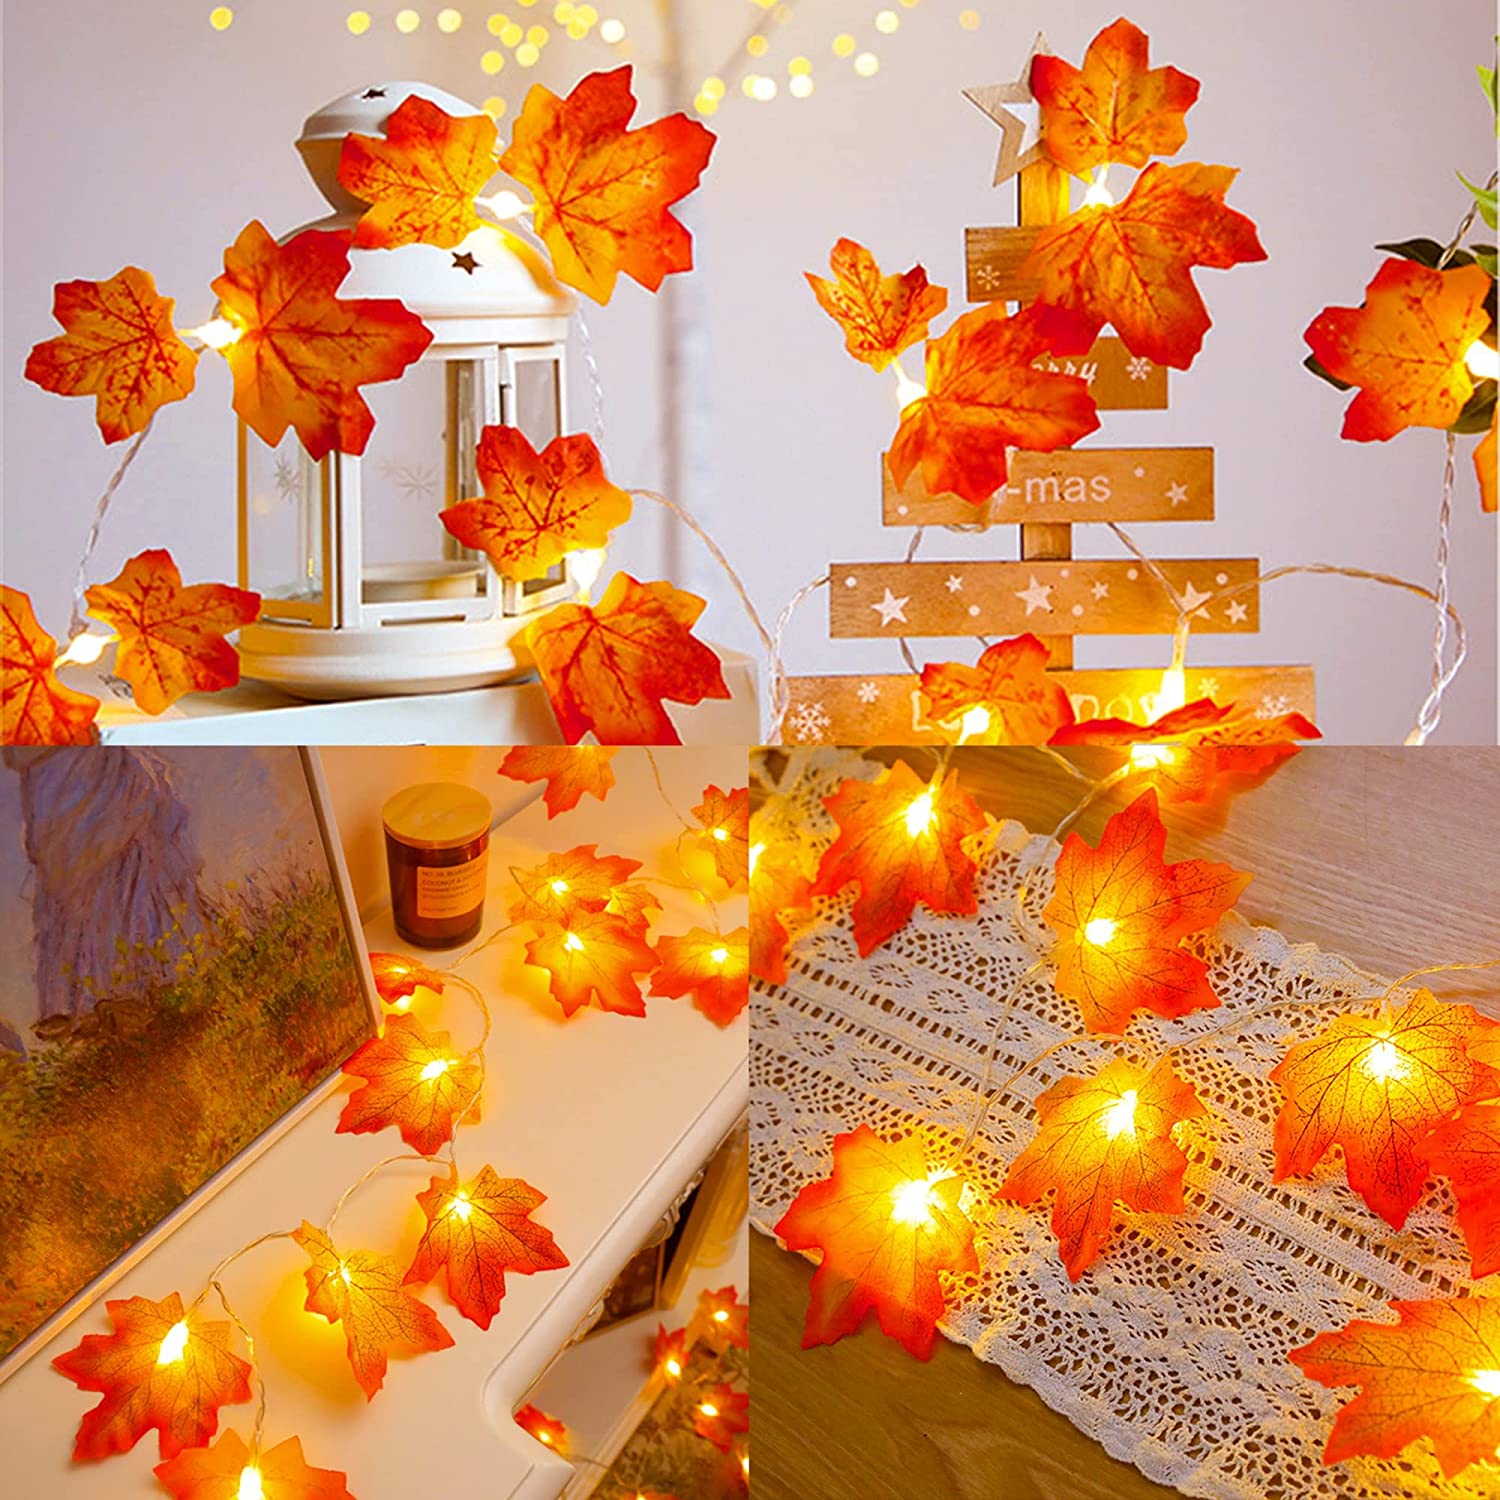 20/30 LED Lighted Fall Autumn Pumpkin Maple Leaves Garland Party Home Xmas Decor 